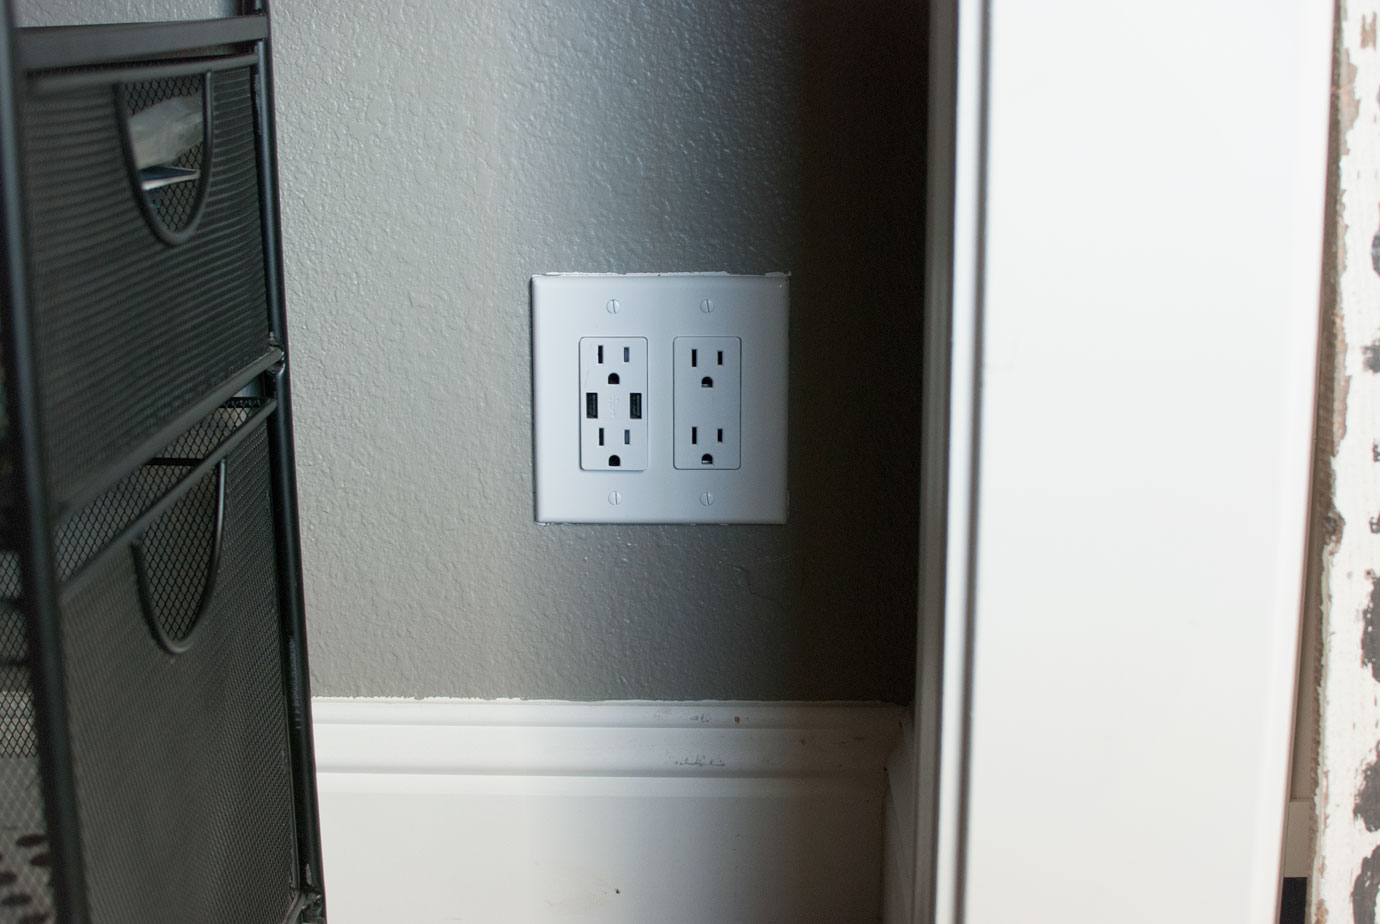 Electrical Outlet With USB Port Charging Installed in the Closet Desk